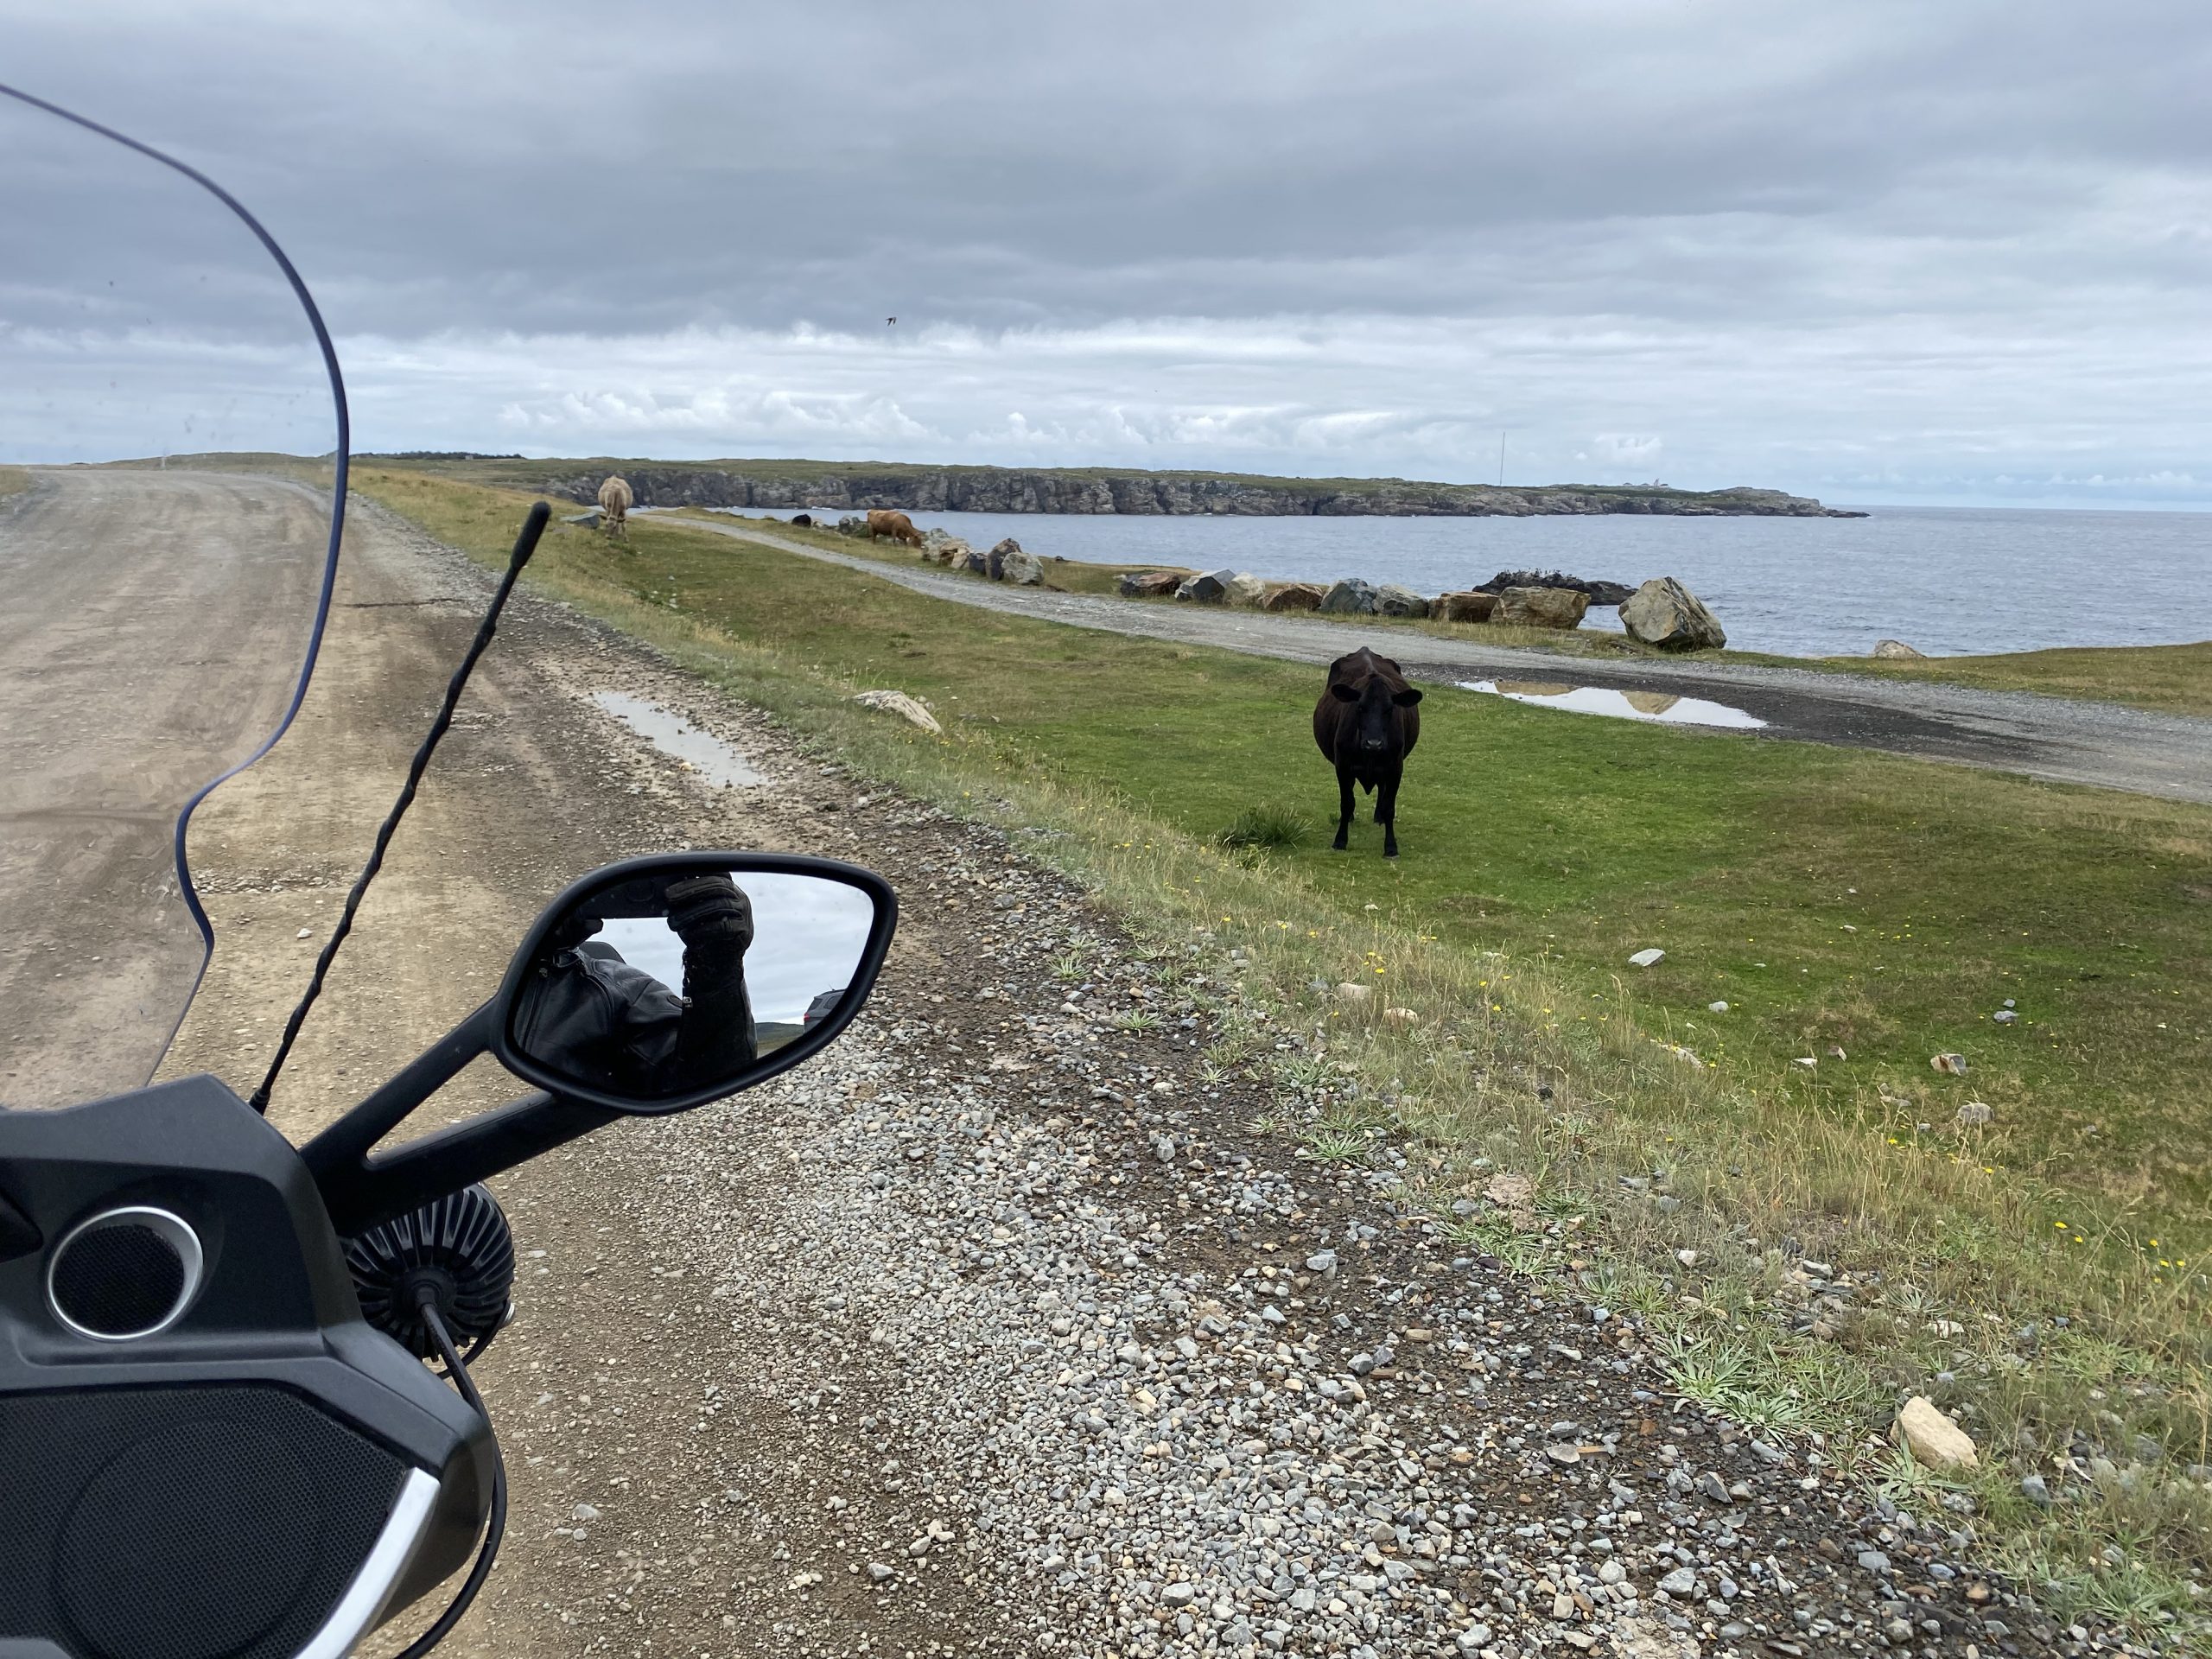 Some cows keep a close eye on us at Dungeon Provincial Park on the Bonavista Peninsula in Newfoundland.